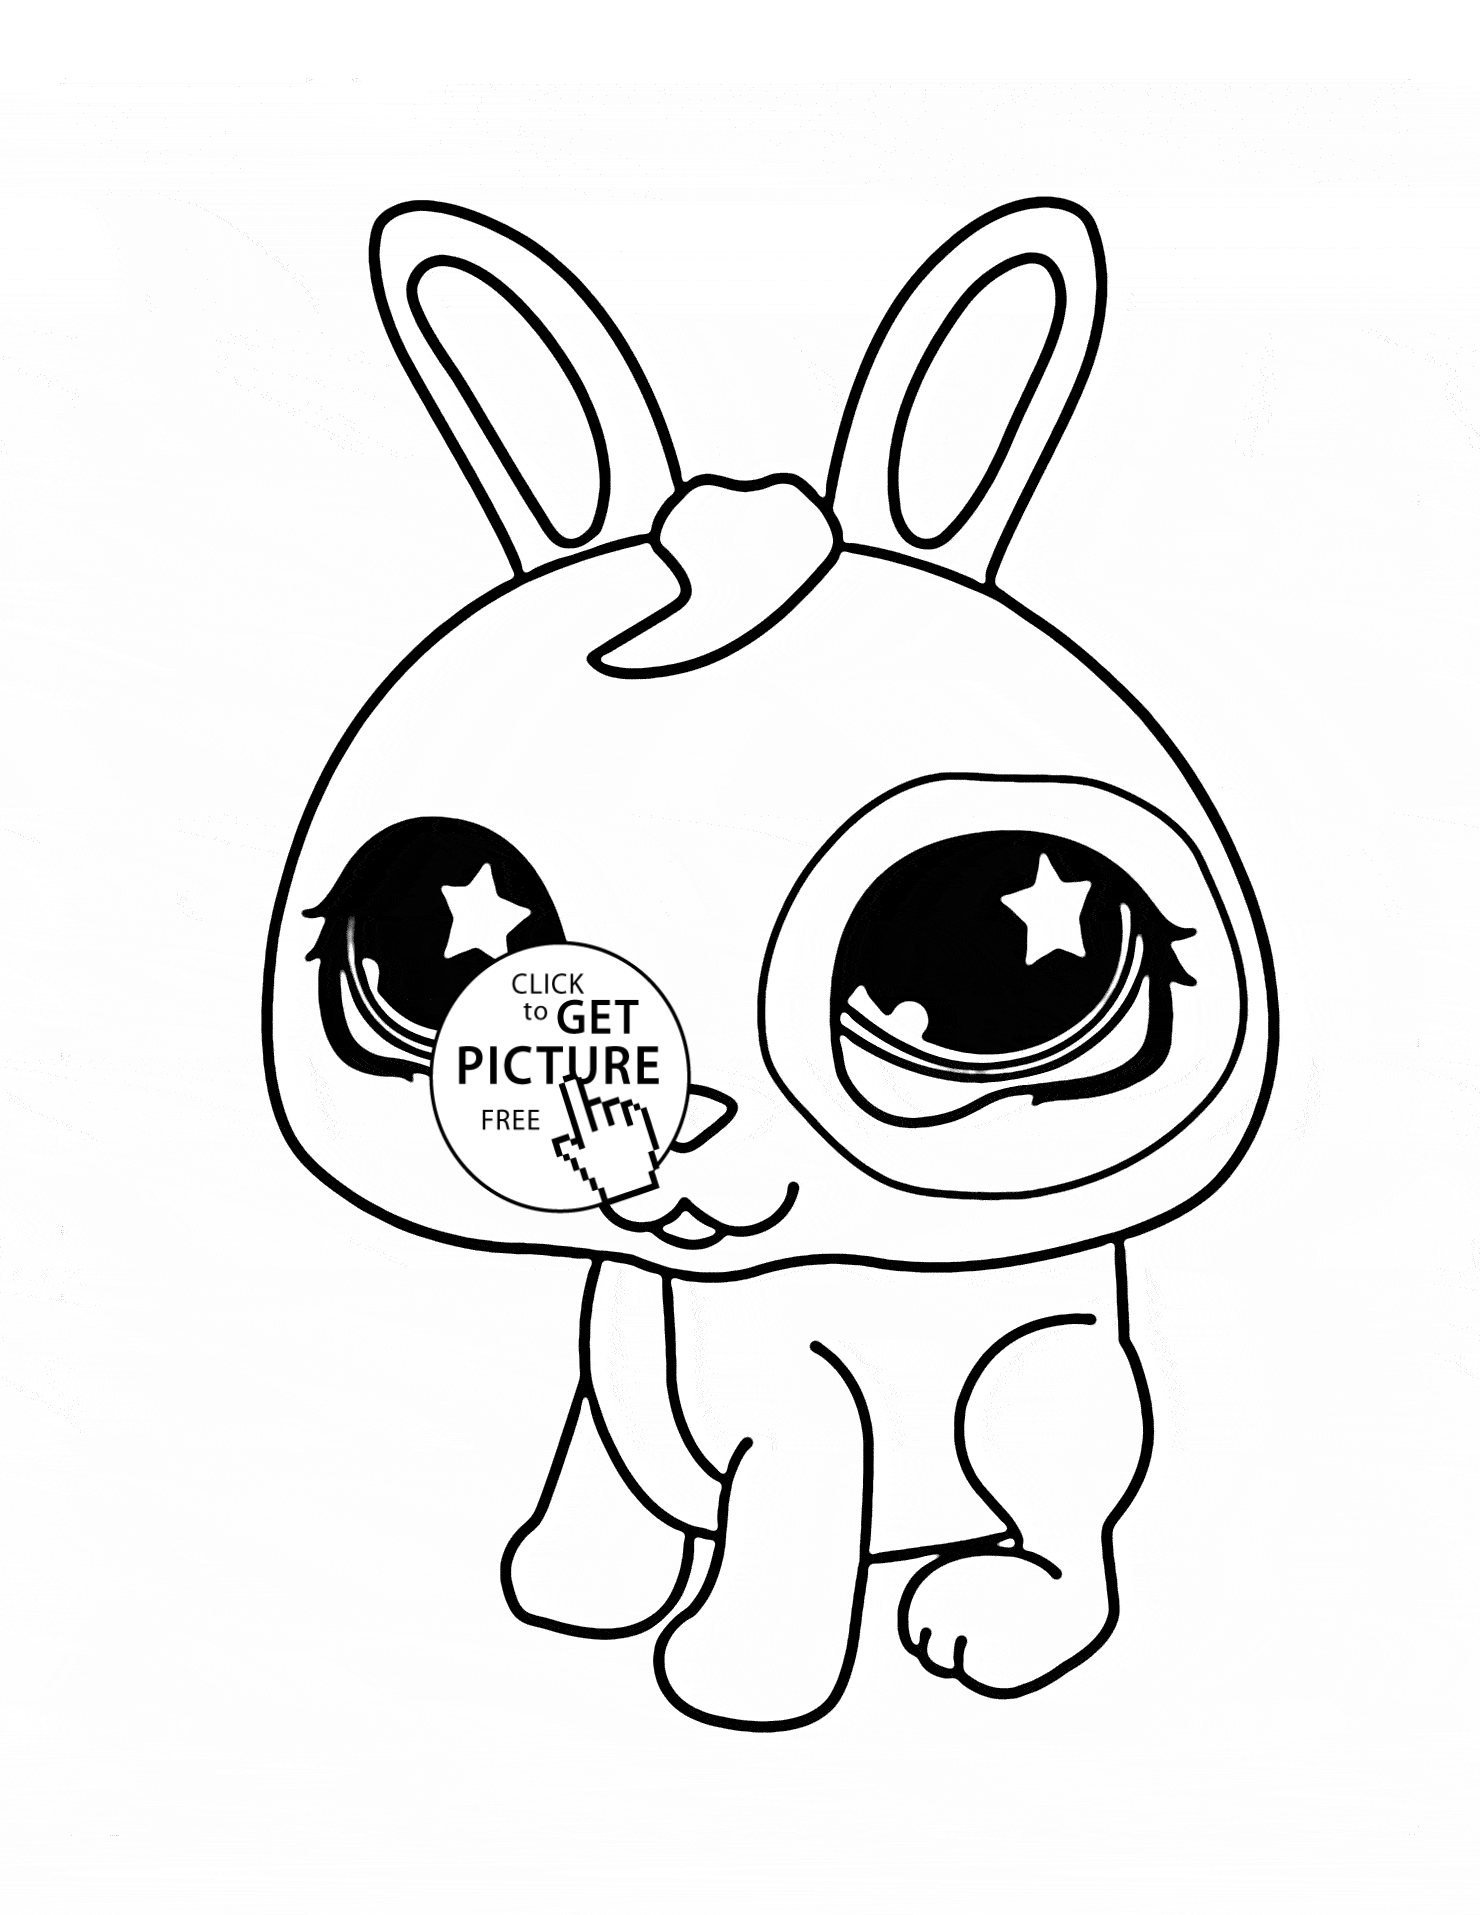 Easter Bunny Face Coloring Pages Coloring Home